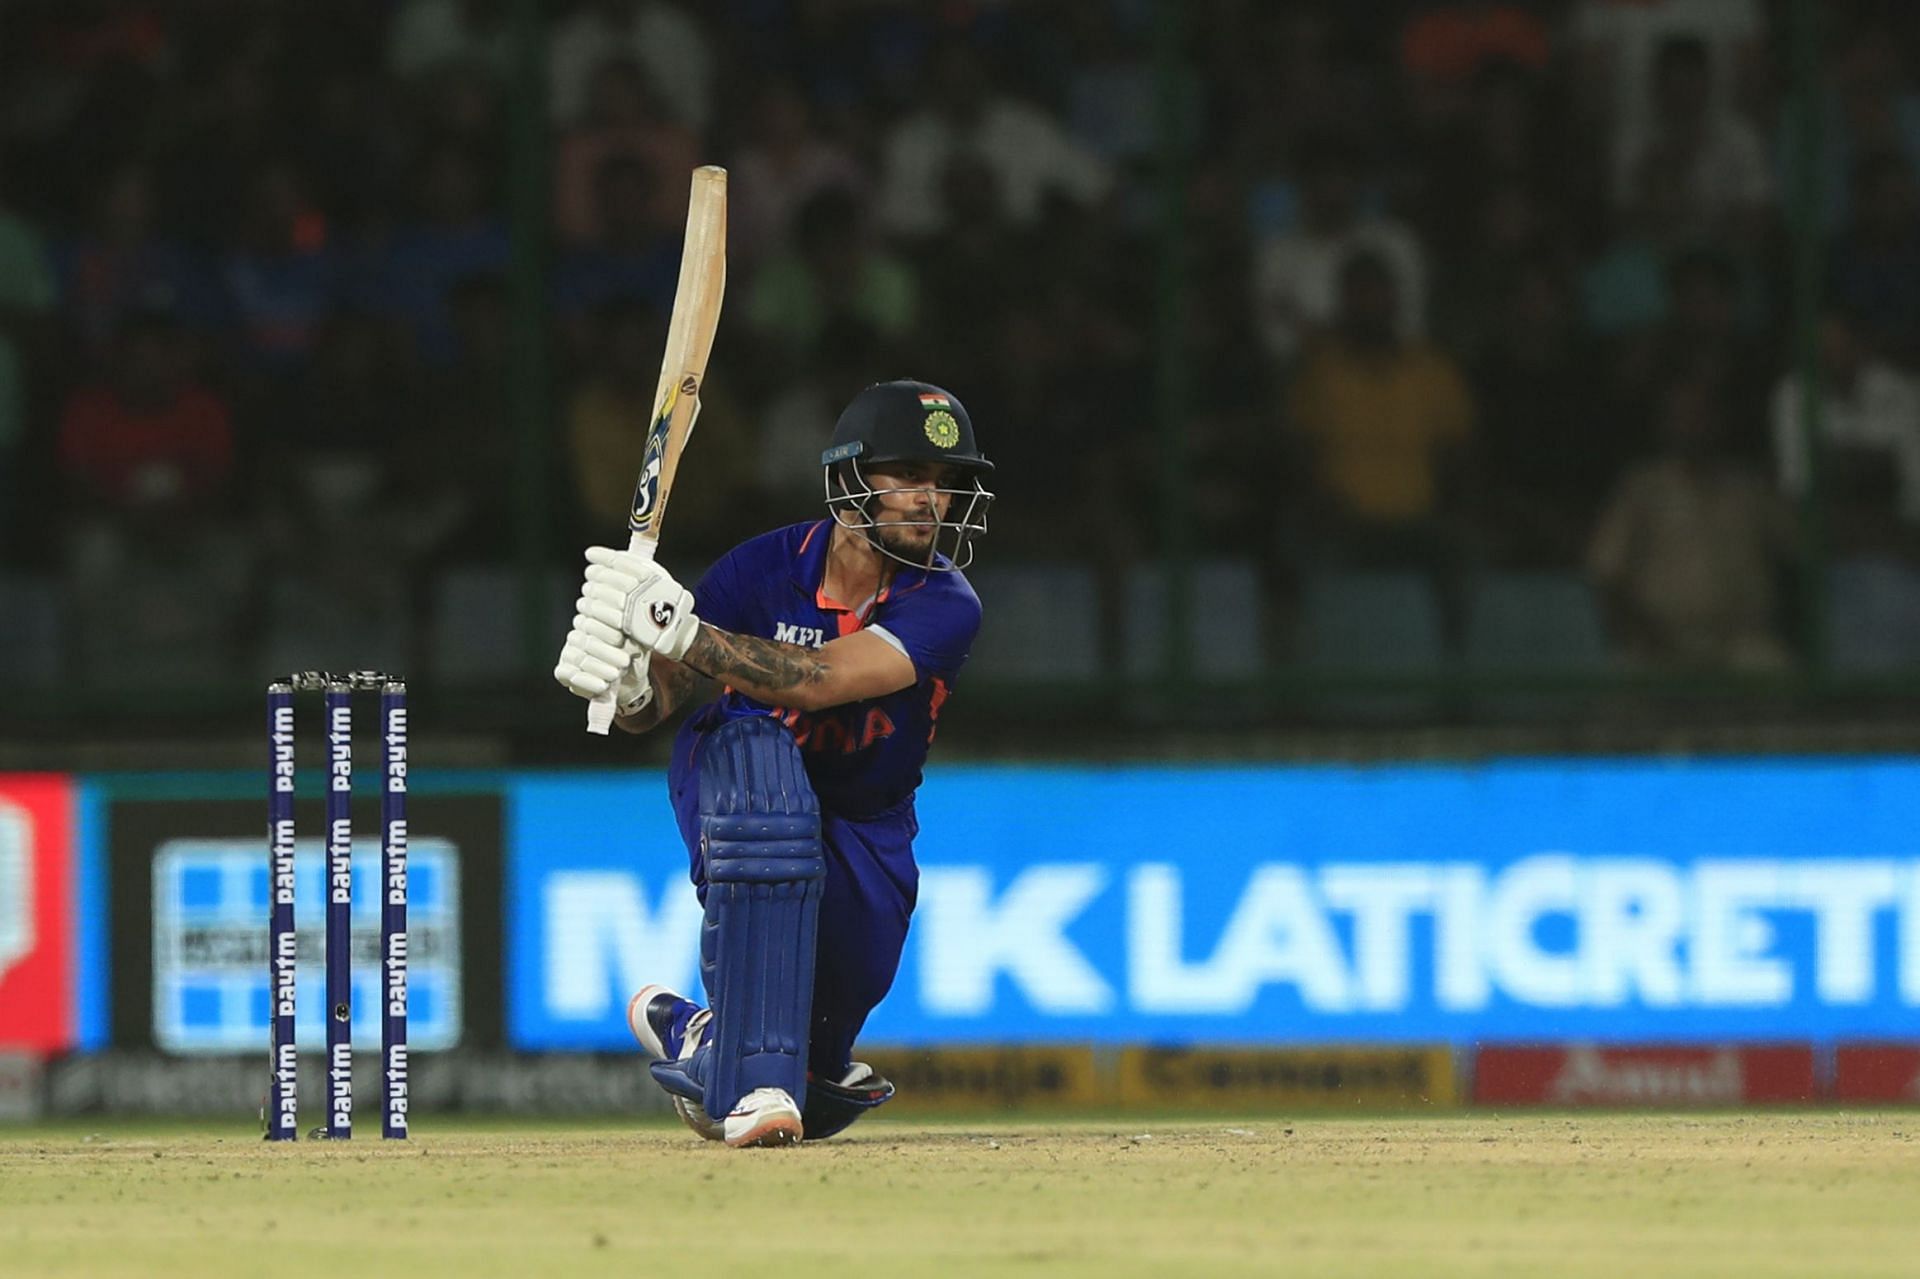 Ishan Kishan played a blazing knock in the second T20I against South Africa